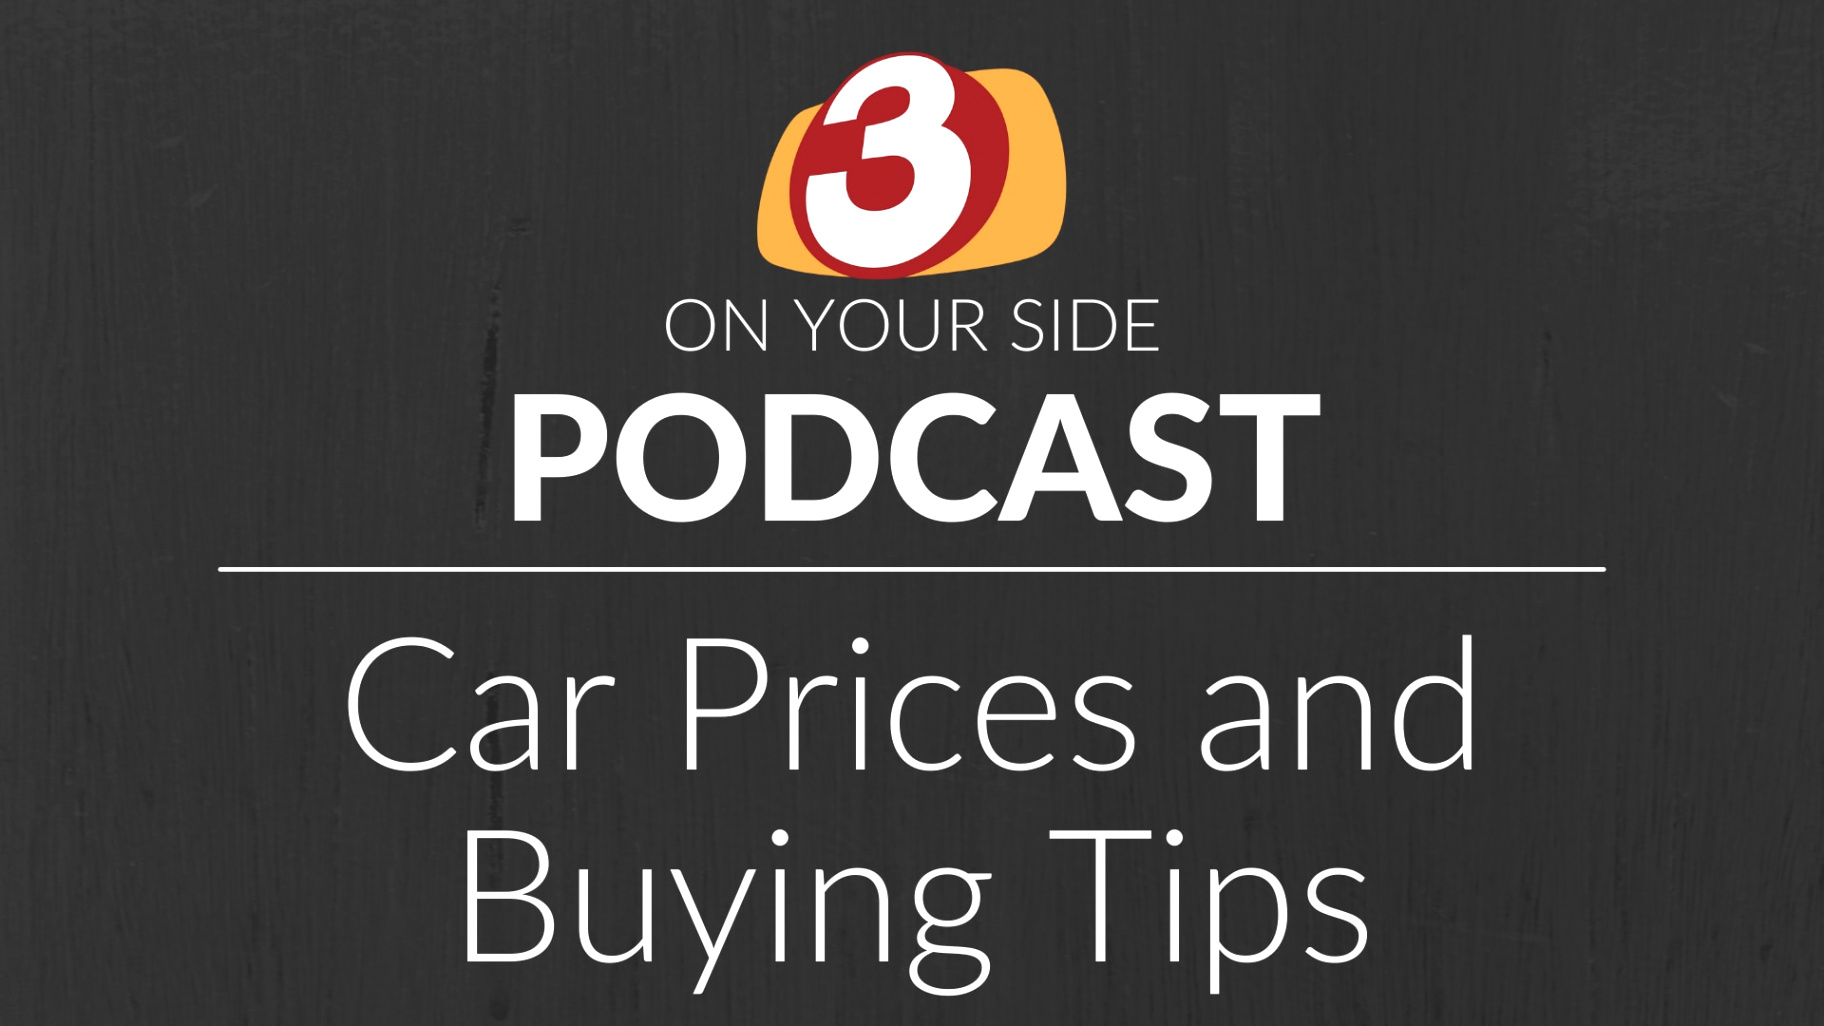 Car Rental software In Lares Pr Dans 3 On Your Side Podcast: Car Prices and Buying Tips